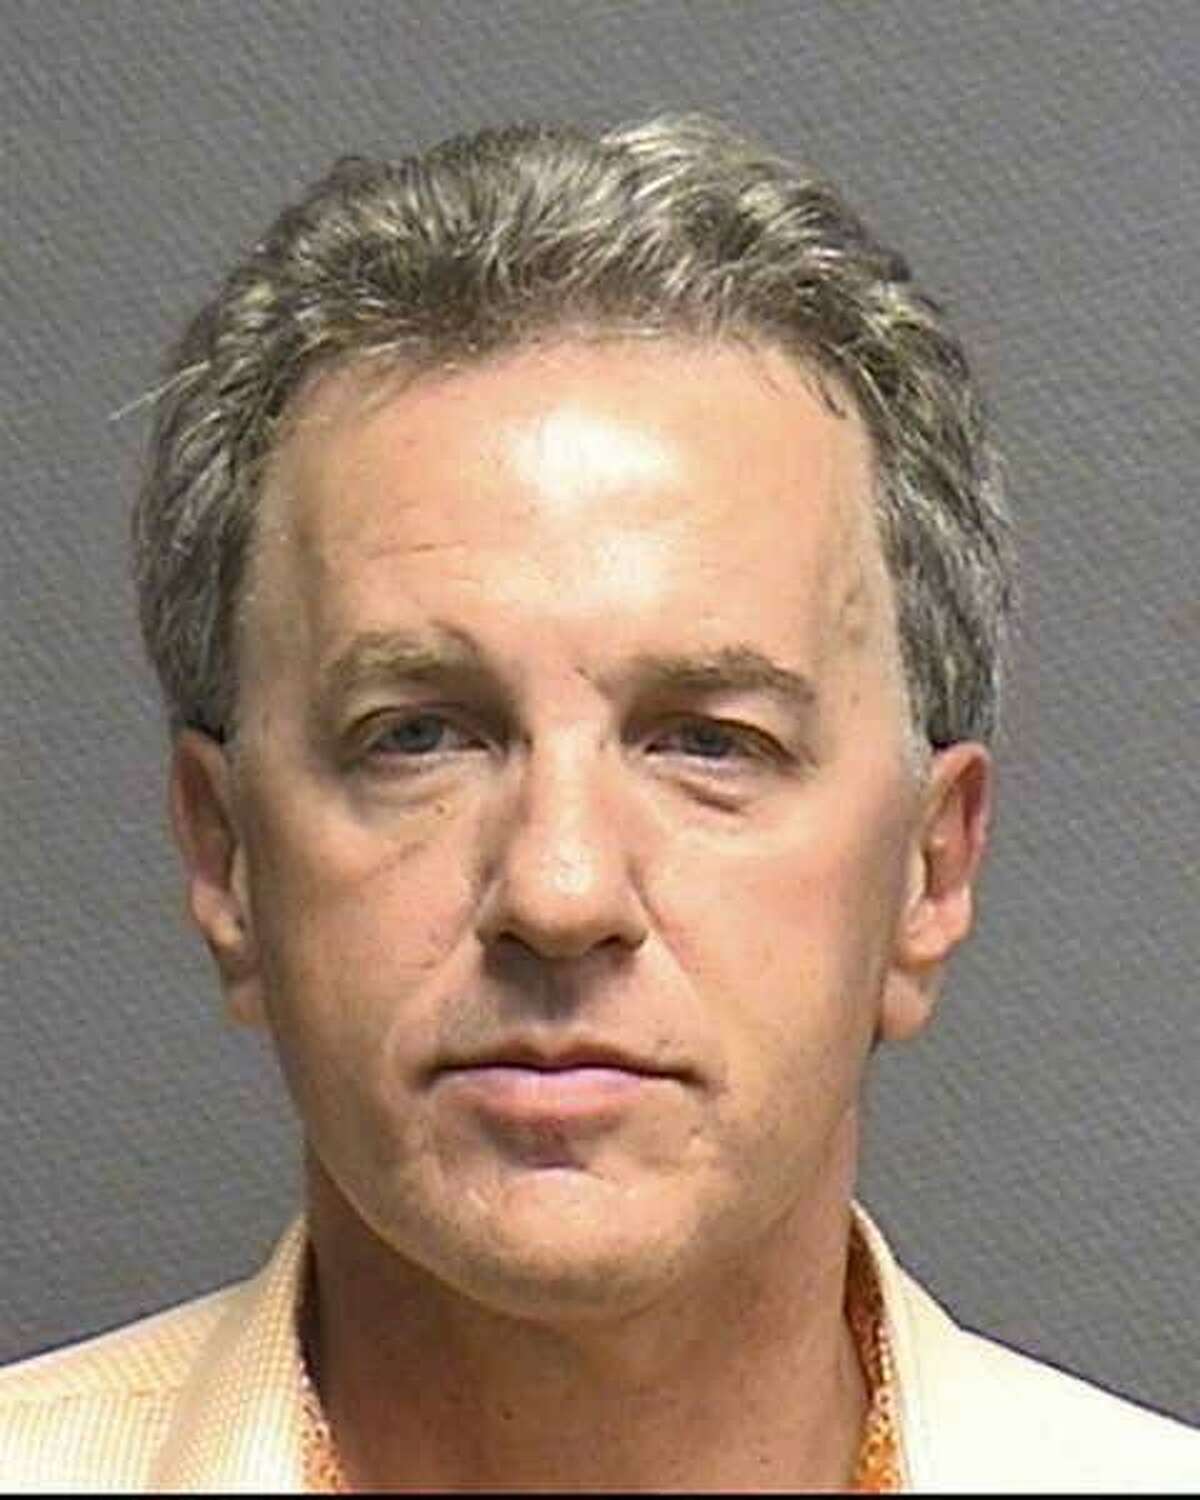 Attorney Jeffrey Stern, age 53, (date of birth 3/16/57), of Bellaire - husband of the woman shot. Right now, he is only charged with unlawfully carrying a weapon. He admitted to his wife that he was having an affair with the woman accused of orchestrating the murder-for-hire plot, according to Yvonne Stern's divorce attorney. His mugshot was released by the Harris County Sheriff's Office.